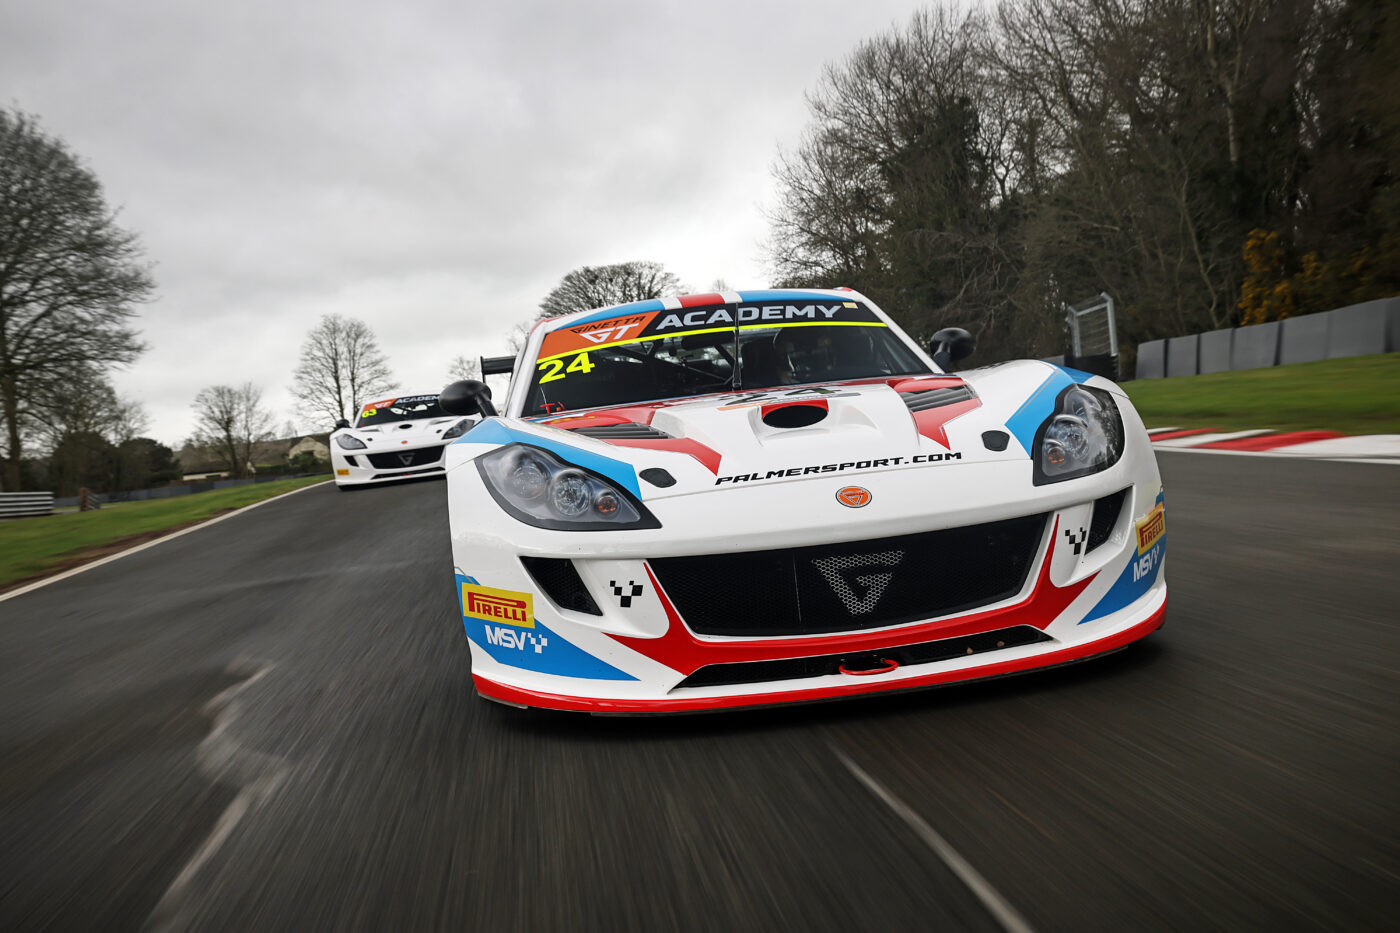 PalmerSport and Ginetta race car